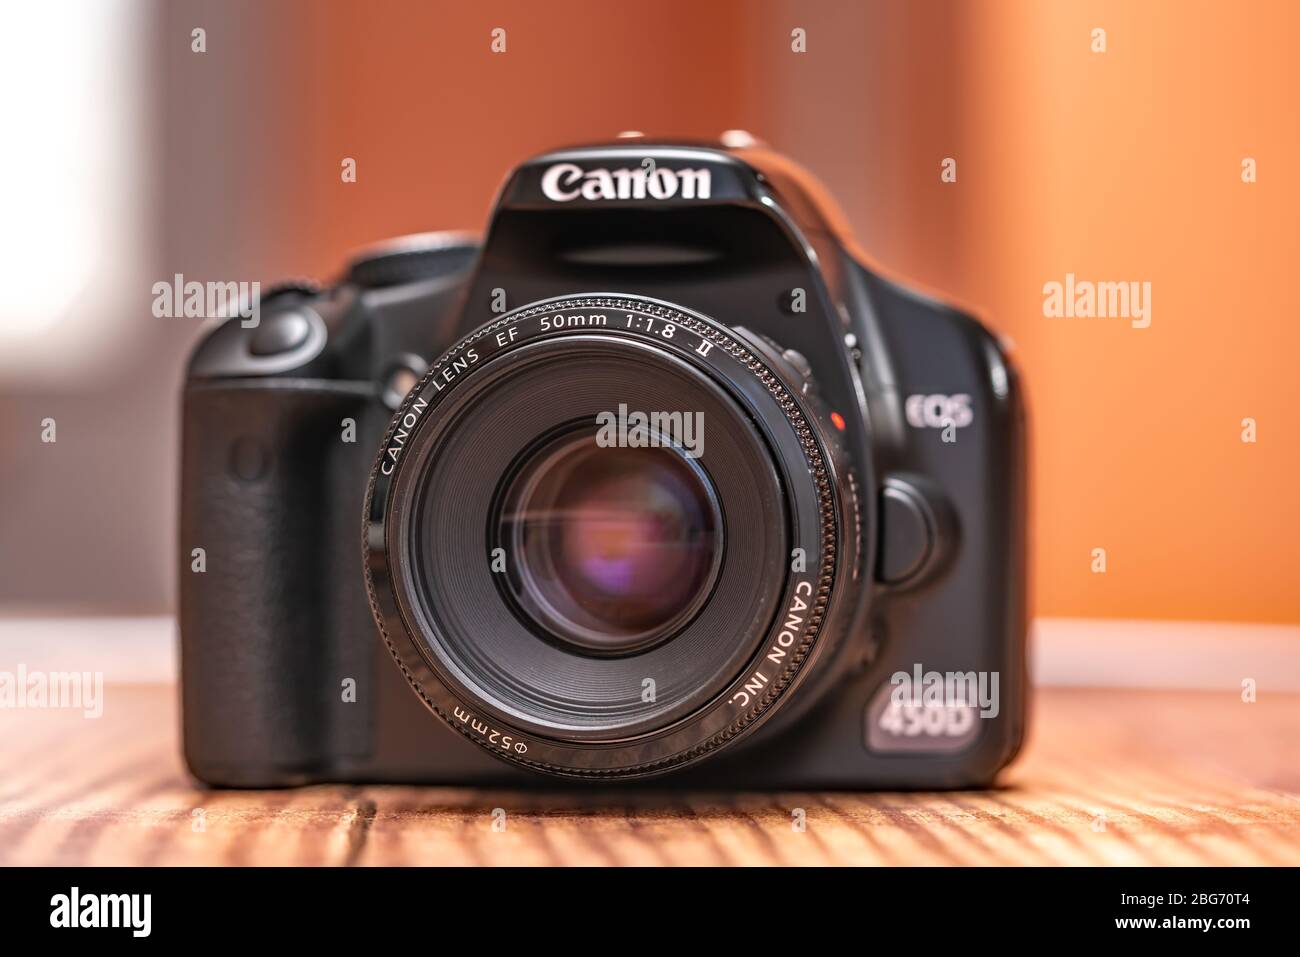 Norwich, Norfolk, UK – April 19 2020. Front on view of classic Canon EOS 450d dslr camera and 50mm f1.8 prime lens. Selective focus on the lens with Stock Photo